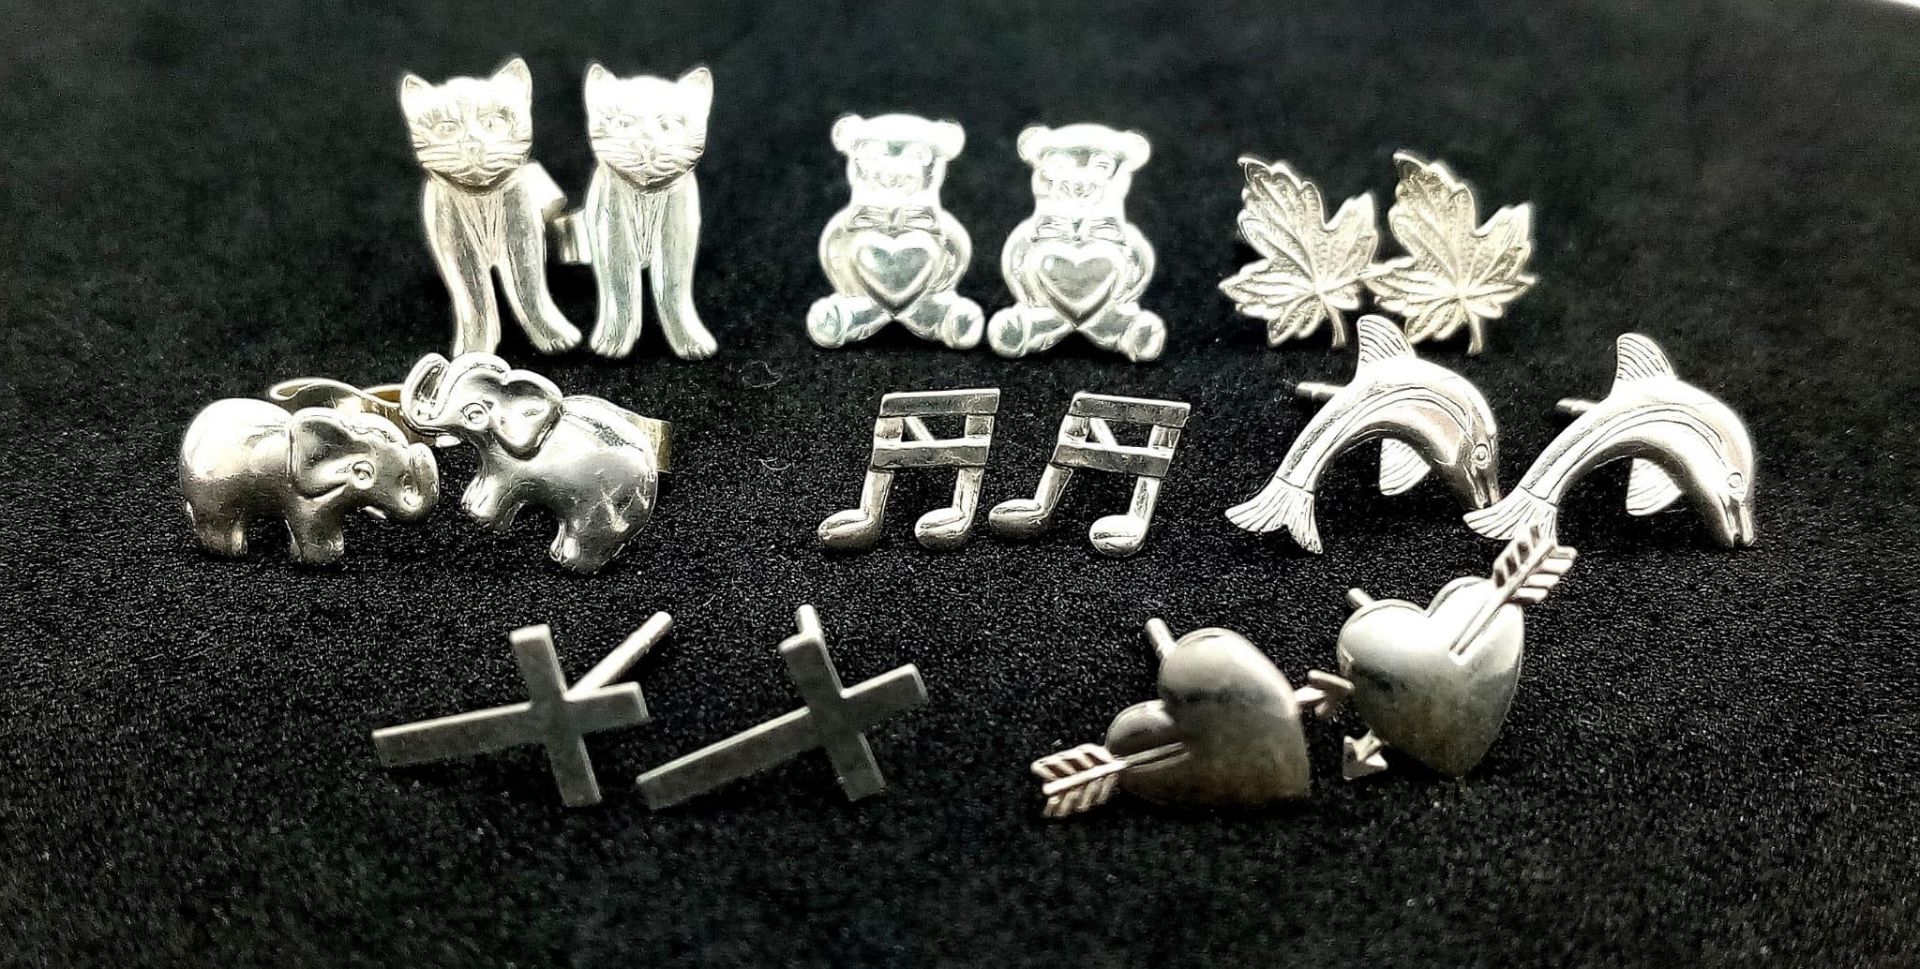 SELECTION OF 8 PAIRS OF STERLING SILVER STUD EARRINGS TO INCLUDE DOLPHINS, TEDDY BEAR, CAT,HEARTS,